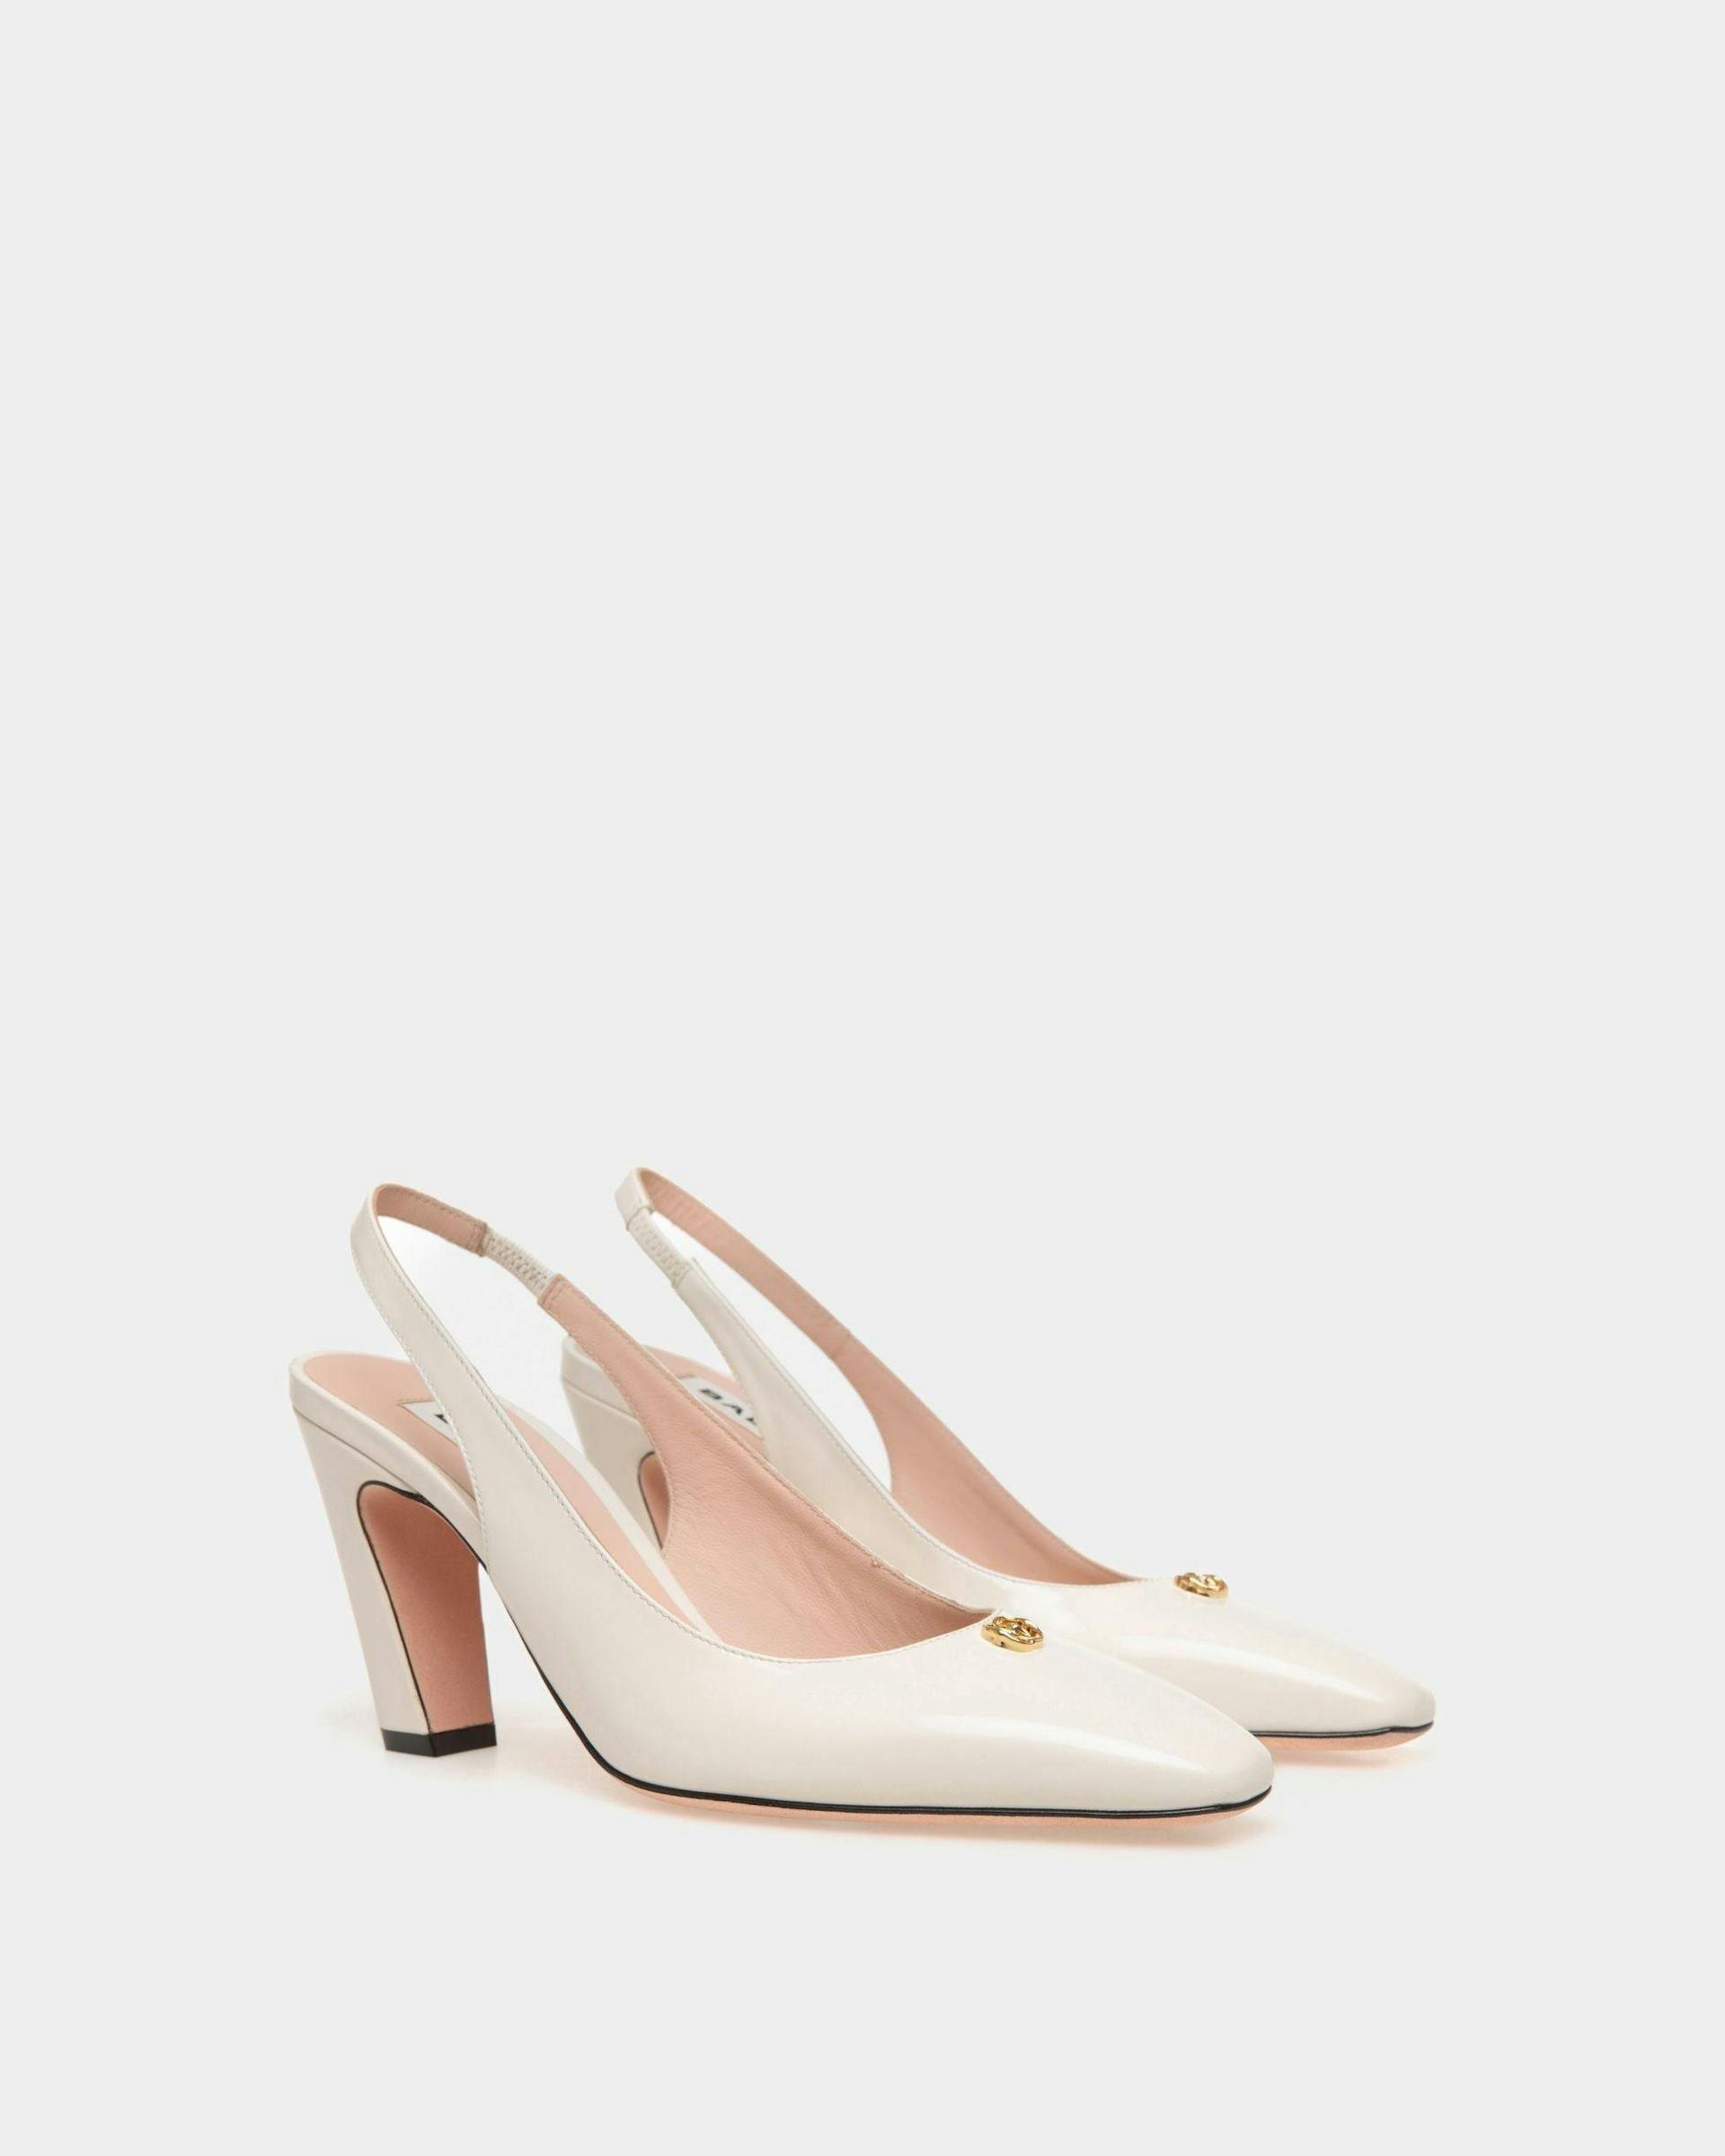 Women's Sylt Slingback Pump In White Leather | Bally | Still Life 3/4 Front